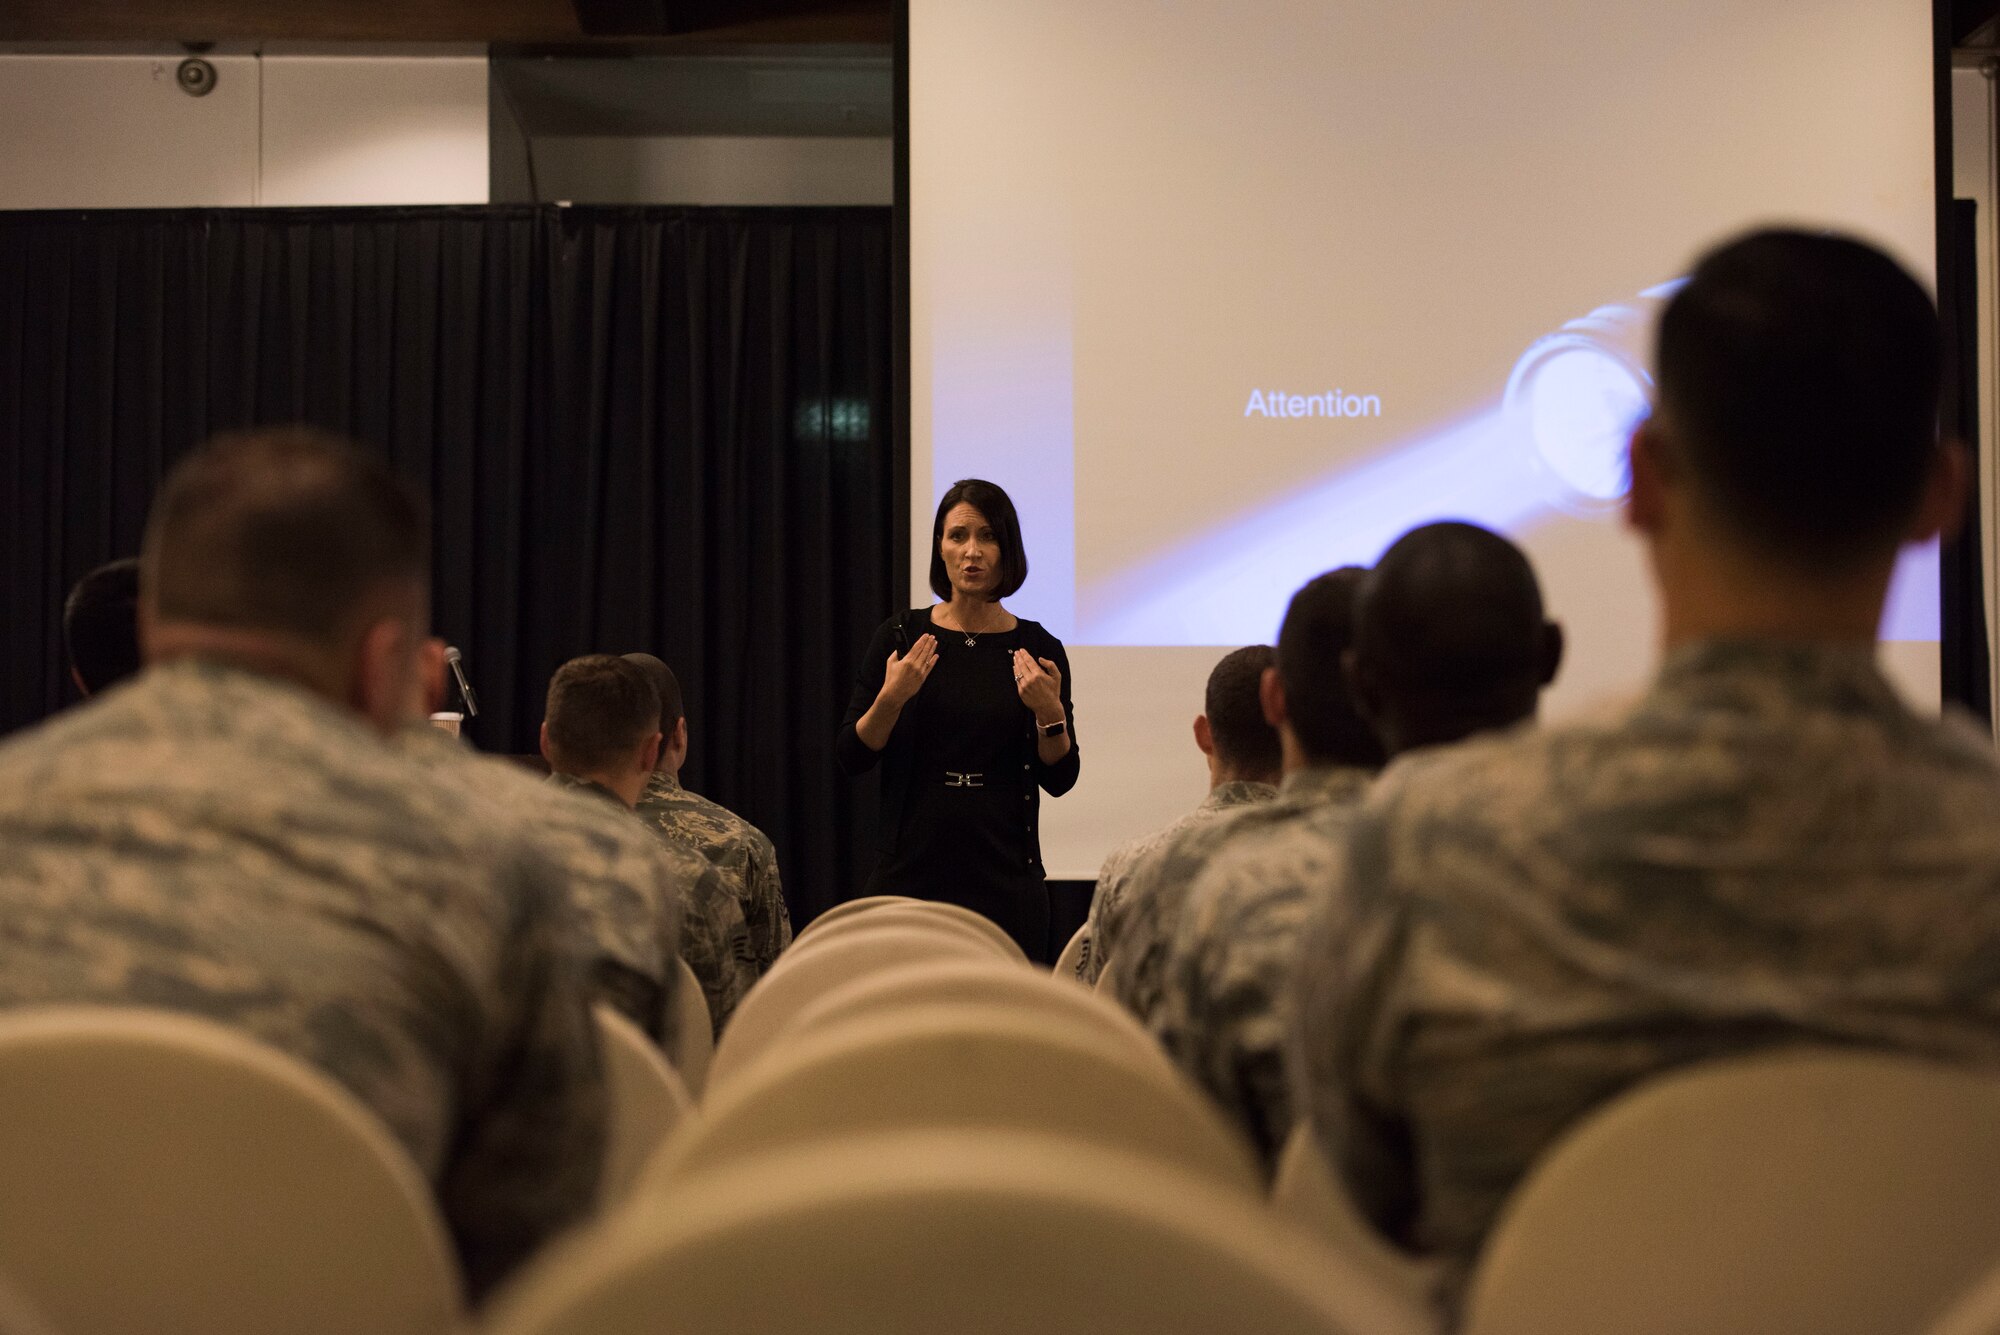 Retired U.S. Air Force Lt. Col. Jannell MacAulay, leadership and performance specialist consultant, speaks to Airmen at Ramstein Air Base, Germany, June 4, 2018. MacAulay is leading the charge to have mindfulness training implemented into U.S. Air Force policy, in order to improve performance of service members in high stress situations. (U.S. Air Force photo by Senior Airman Devin M. Rumbaugh)